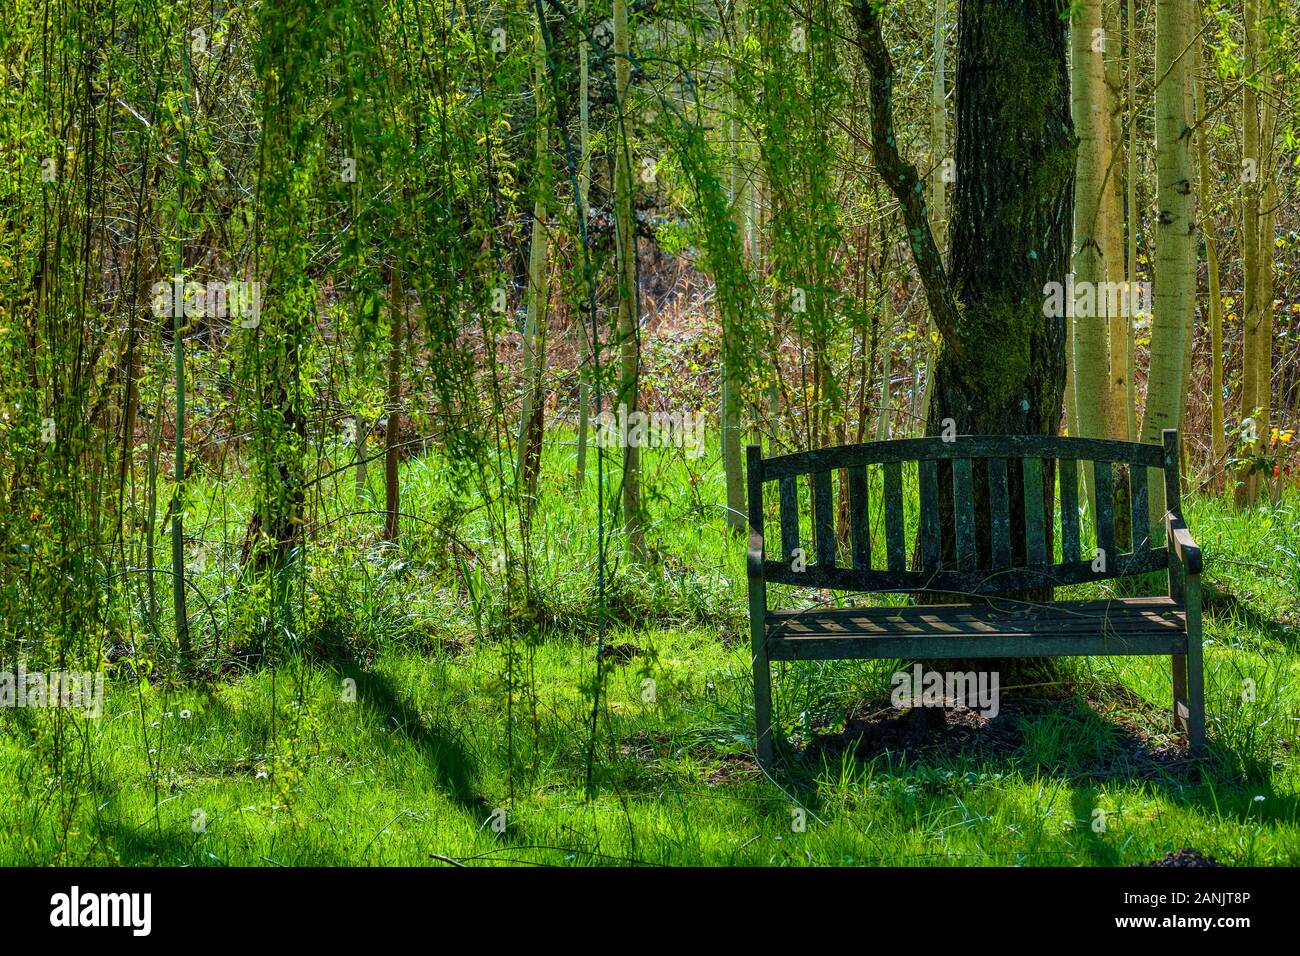 Bench sits grass in the shade of a willow tree, it's long limbs nearly touching the ground. Stock Photo